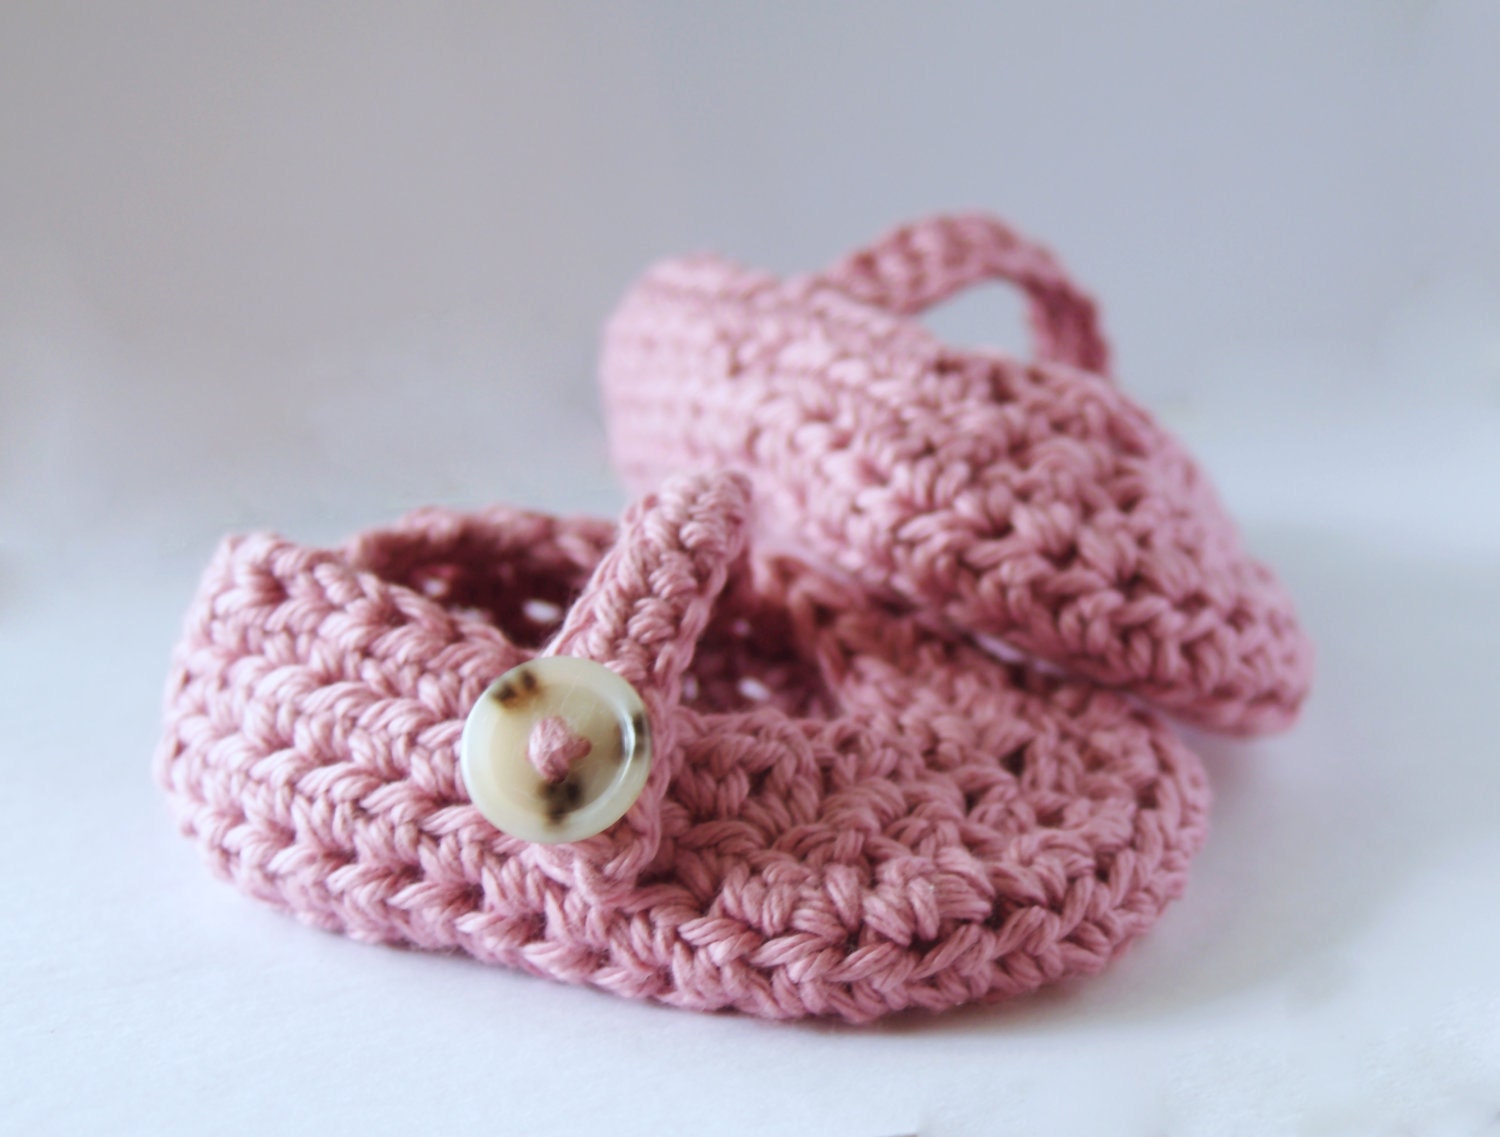 Crocheted Baby Mary Janes Baby Booties Cotton Yarn | Etsy